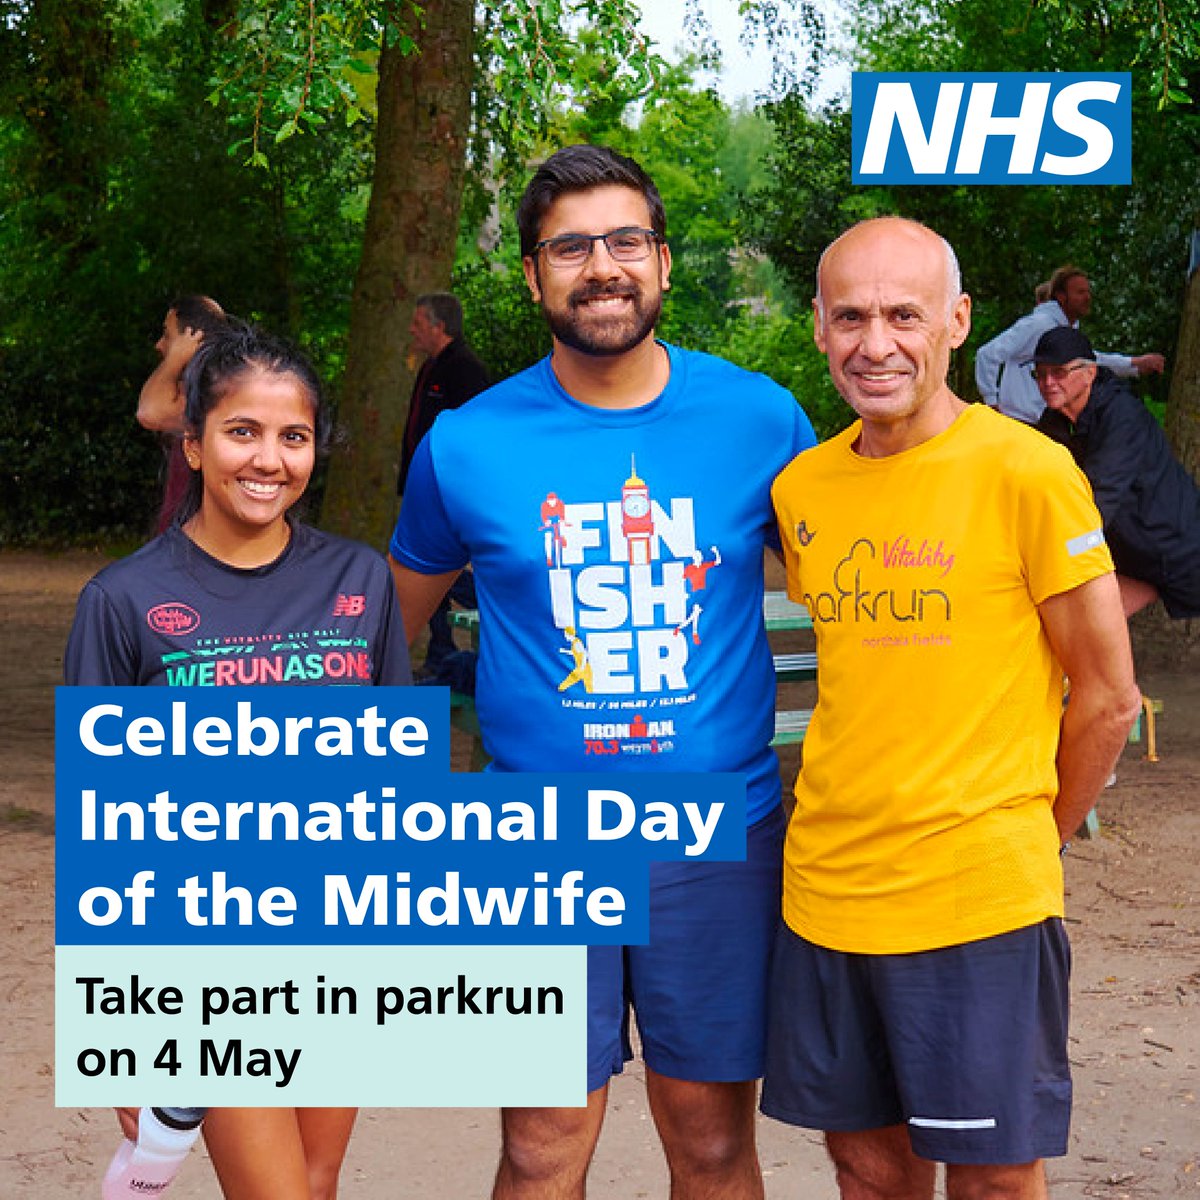 Celebrate International Day of the Midwife #IDM2024 and take part in a @parkrunUK event this Saturday (4 May). Don’t forget to register for your local parkrun event in advance and join our parkrun group. #teamCMidO 👉 parkrun.org.uk/groups/48795/